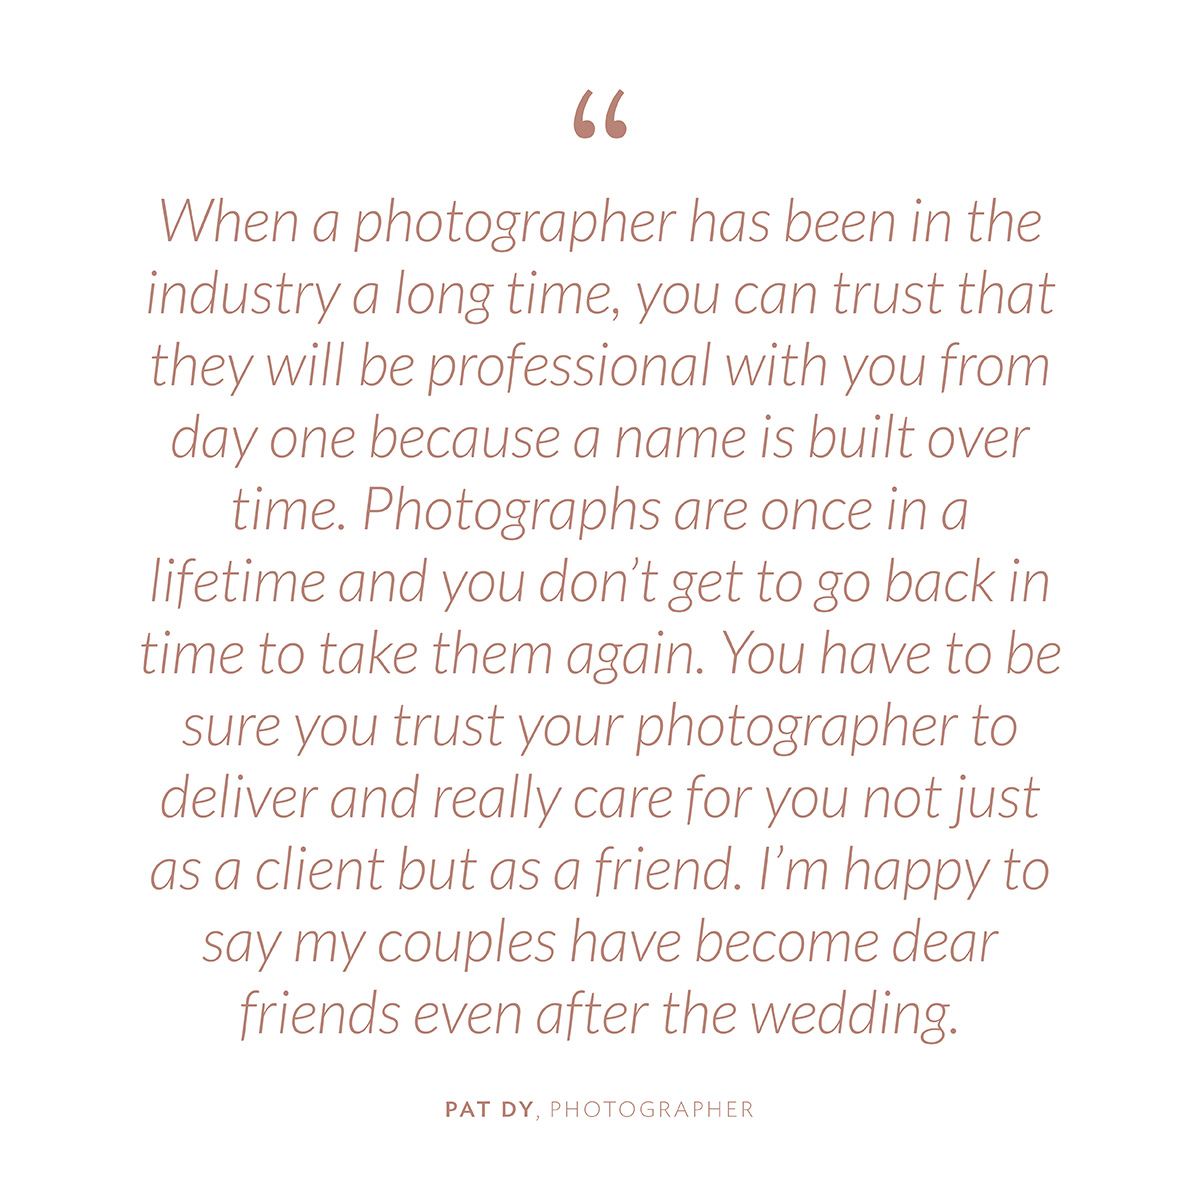 “When a photographer has been in the industry a long time, you can trust that they will be professional with you from day one because a name is built over time. Photographs are once in a lifetime and you don’t get to go back in time to take them again. You have to be sure you trust your photographer to deliver and really care for you not just as a client but as a friend. I’m happy to say my couples have become dear friends even after the wedding” -Pat Dy